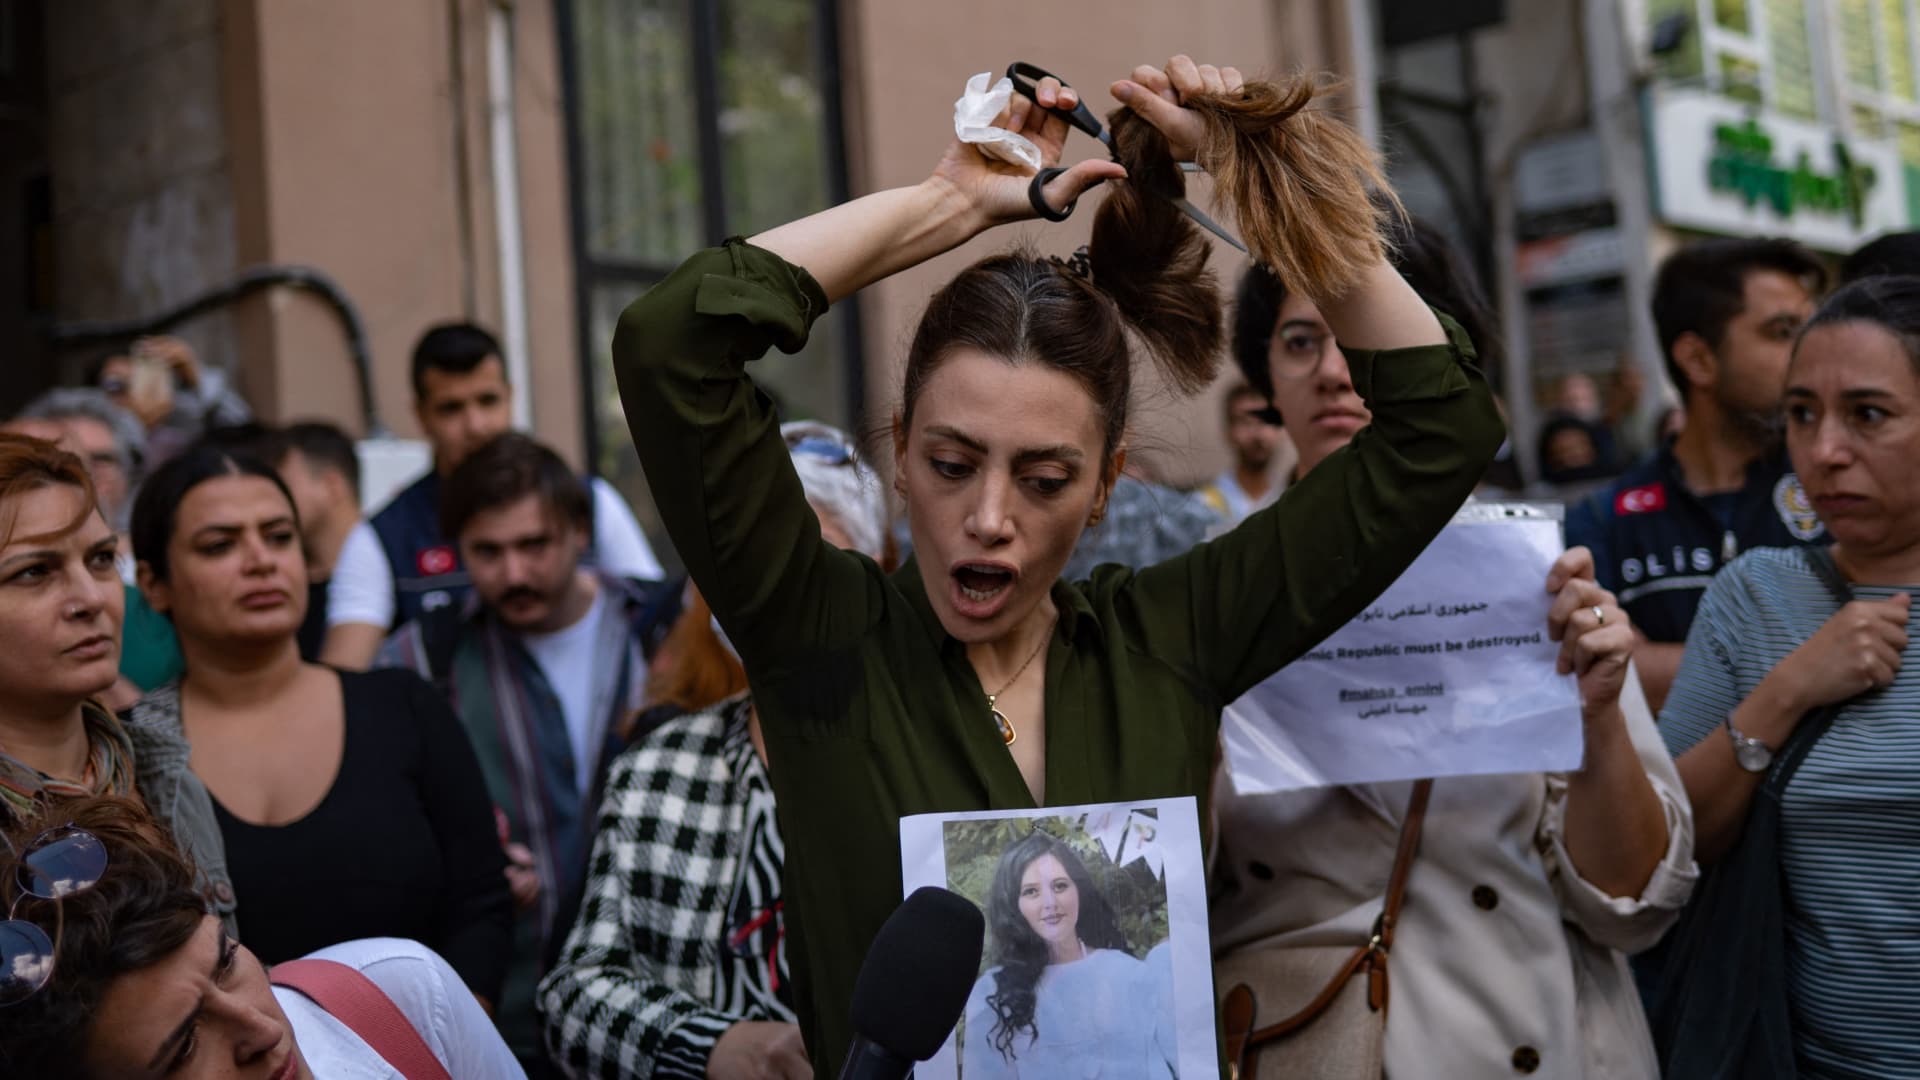 TOPSHOT - Nasibe Samsaei, an Iranian woman living in Turkey, cuts her ponytail off during a protest outside the Iranian consulate in Istanbul on September 21, 2022, following the death of an Iranian woman after her arrest by the country's morality police in Tehran.